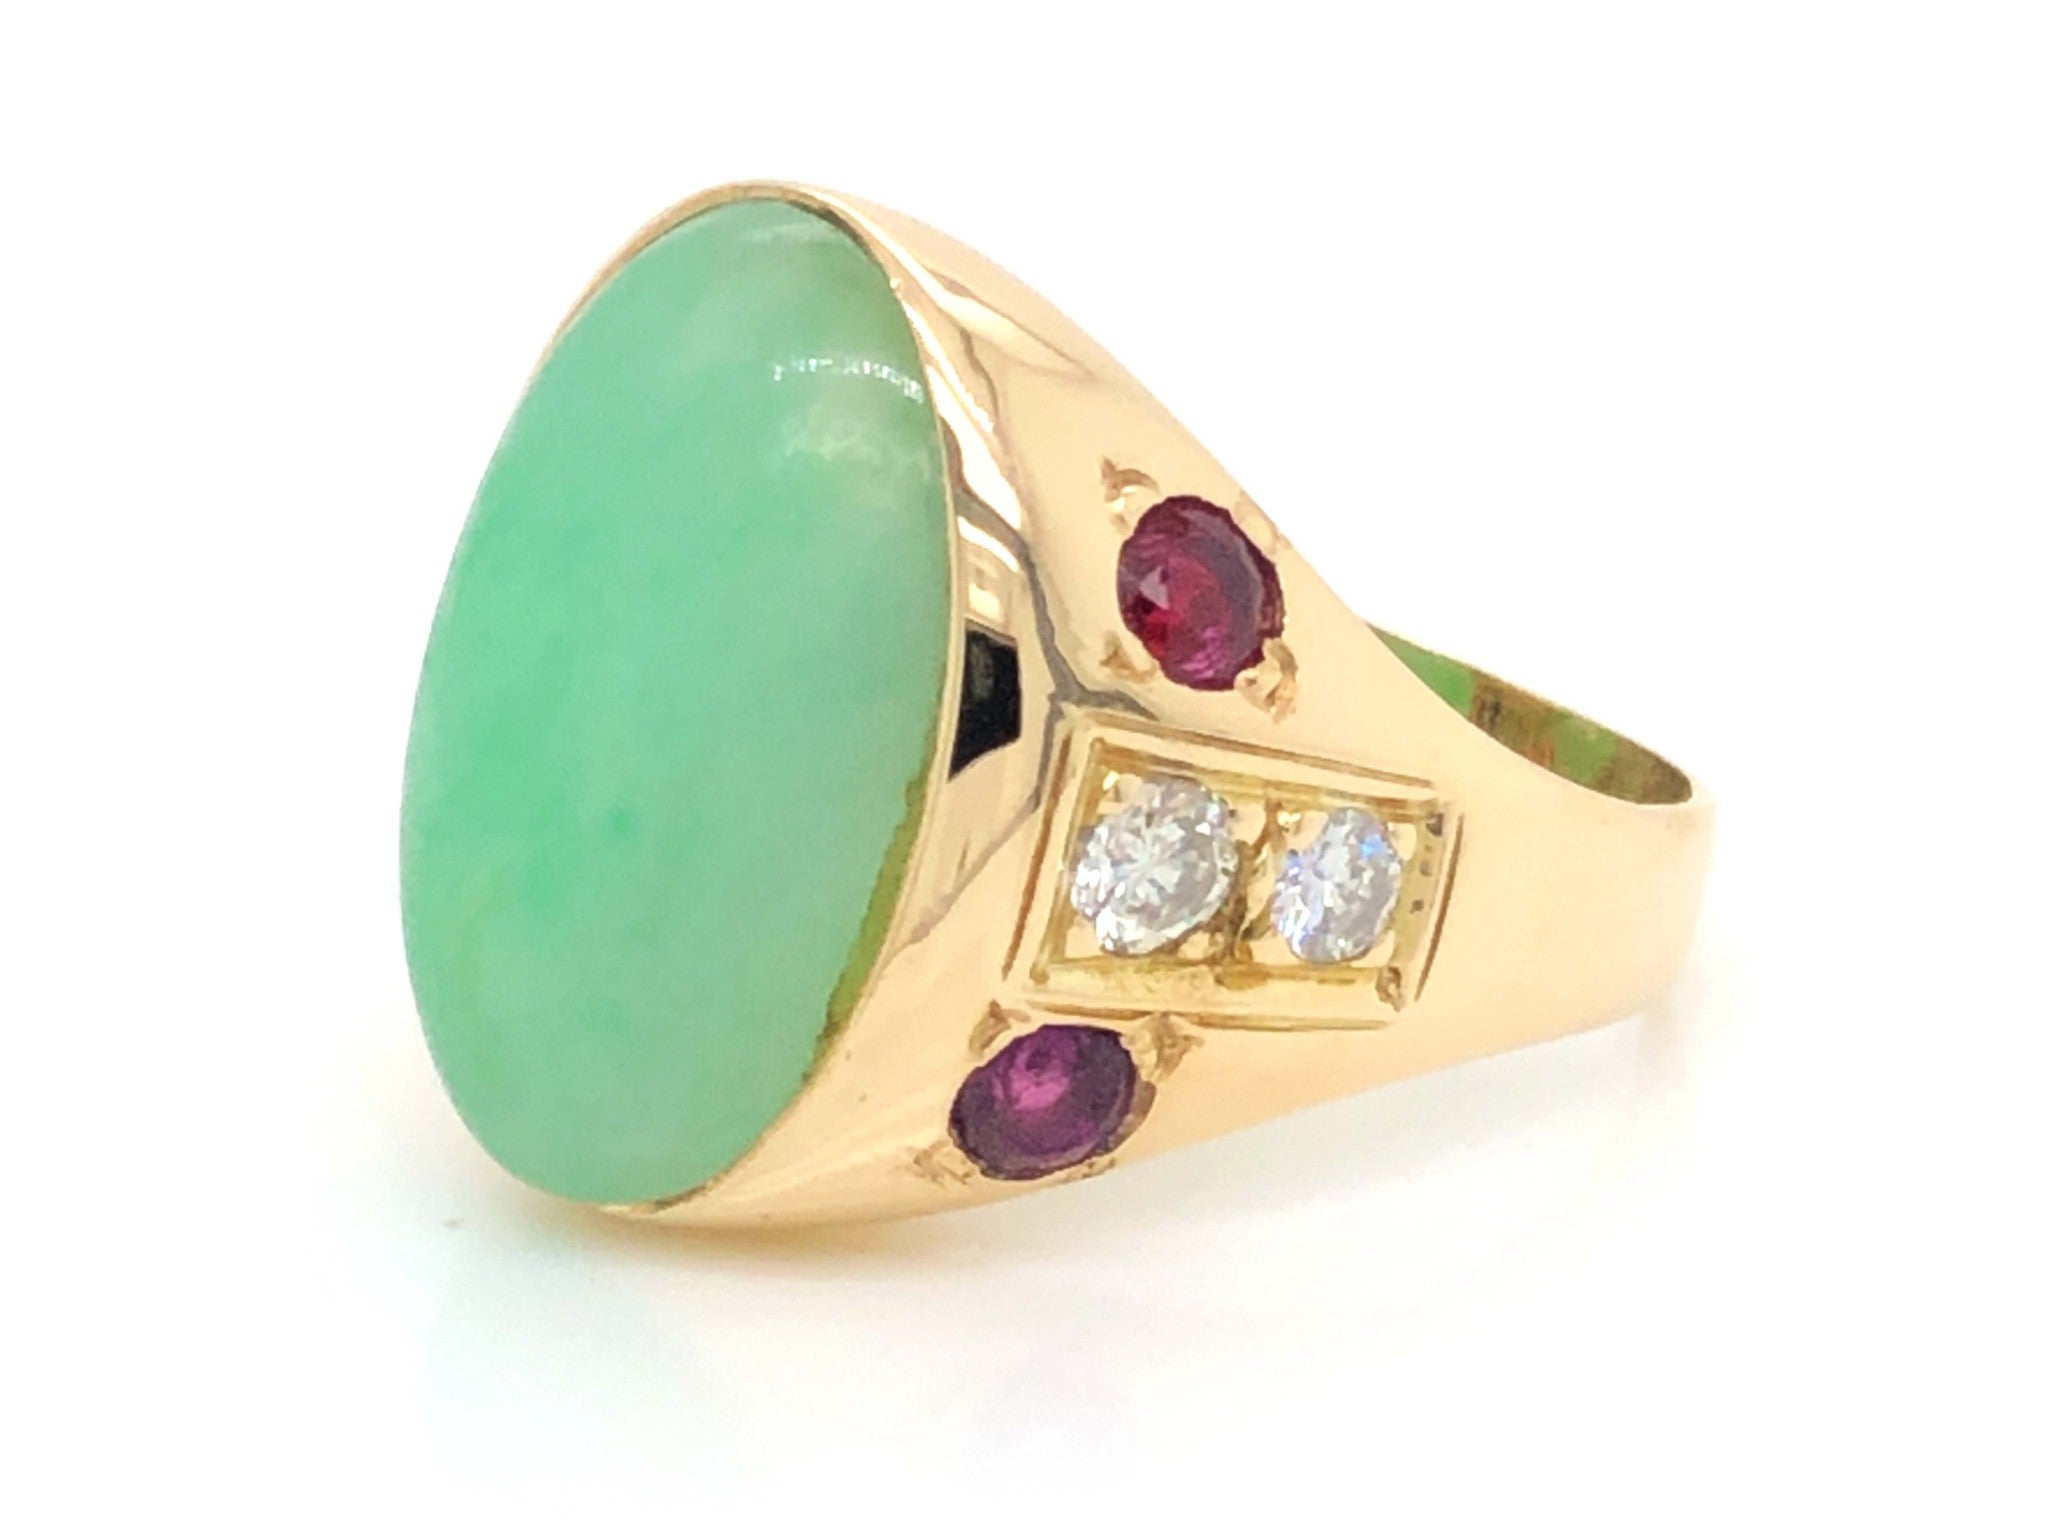 Men's Oval Pale Mottled Green Jade, Diamond and Ruby Ring - 14k Yellow Gold